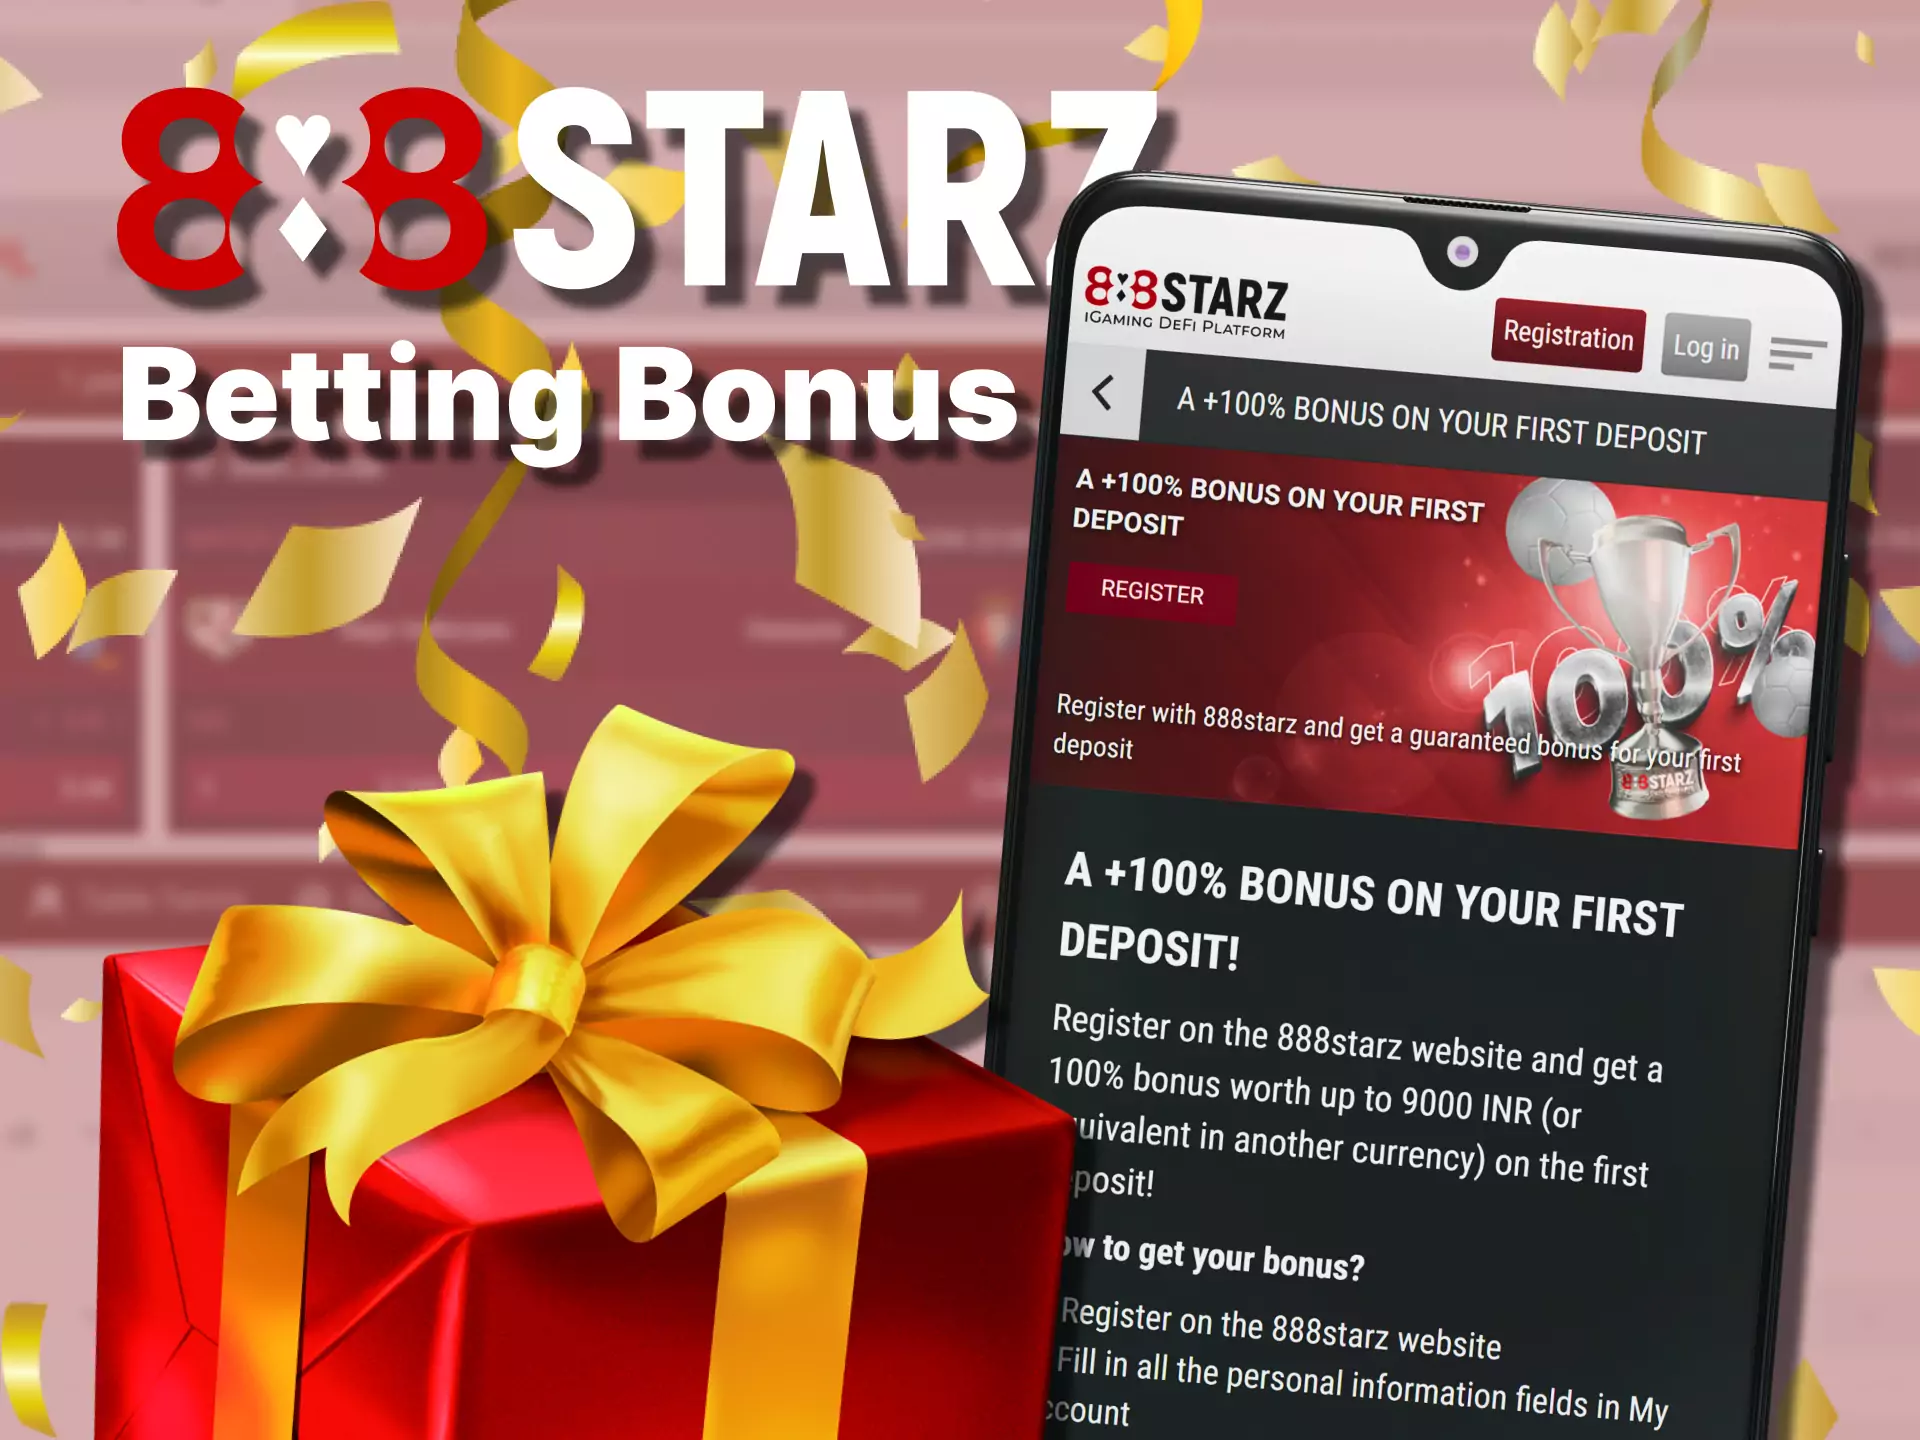 Be sure to get your sports betting bonus for your first deposit in the 888starz app.